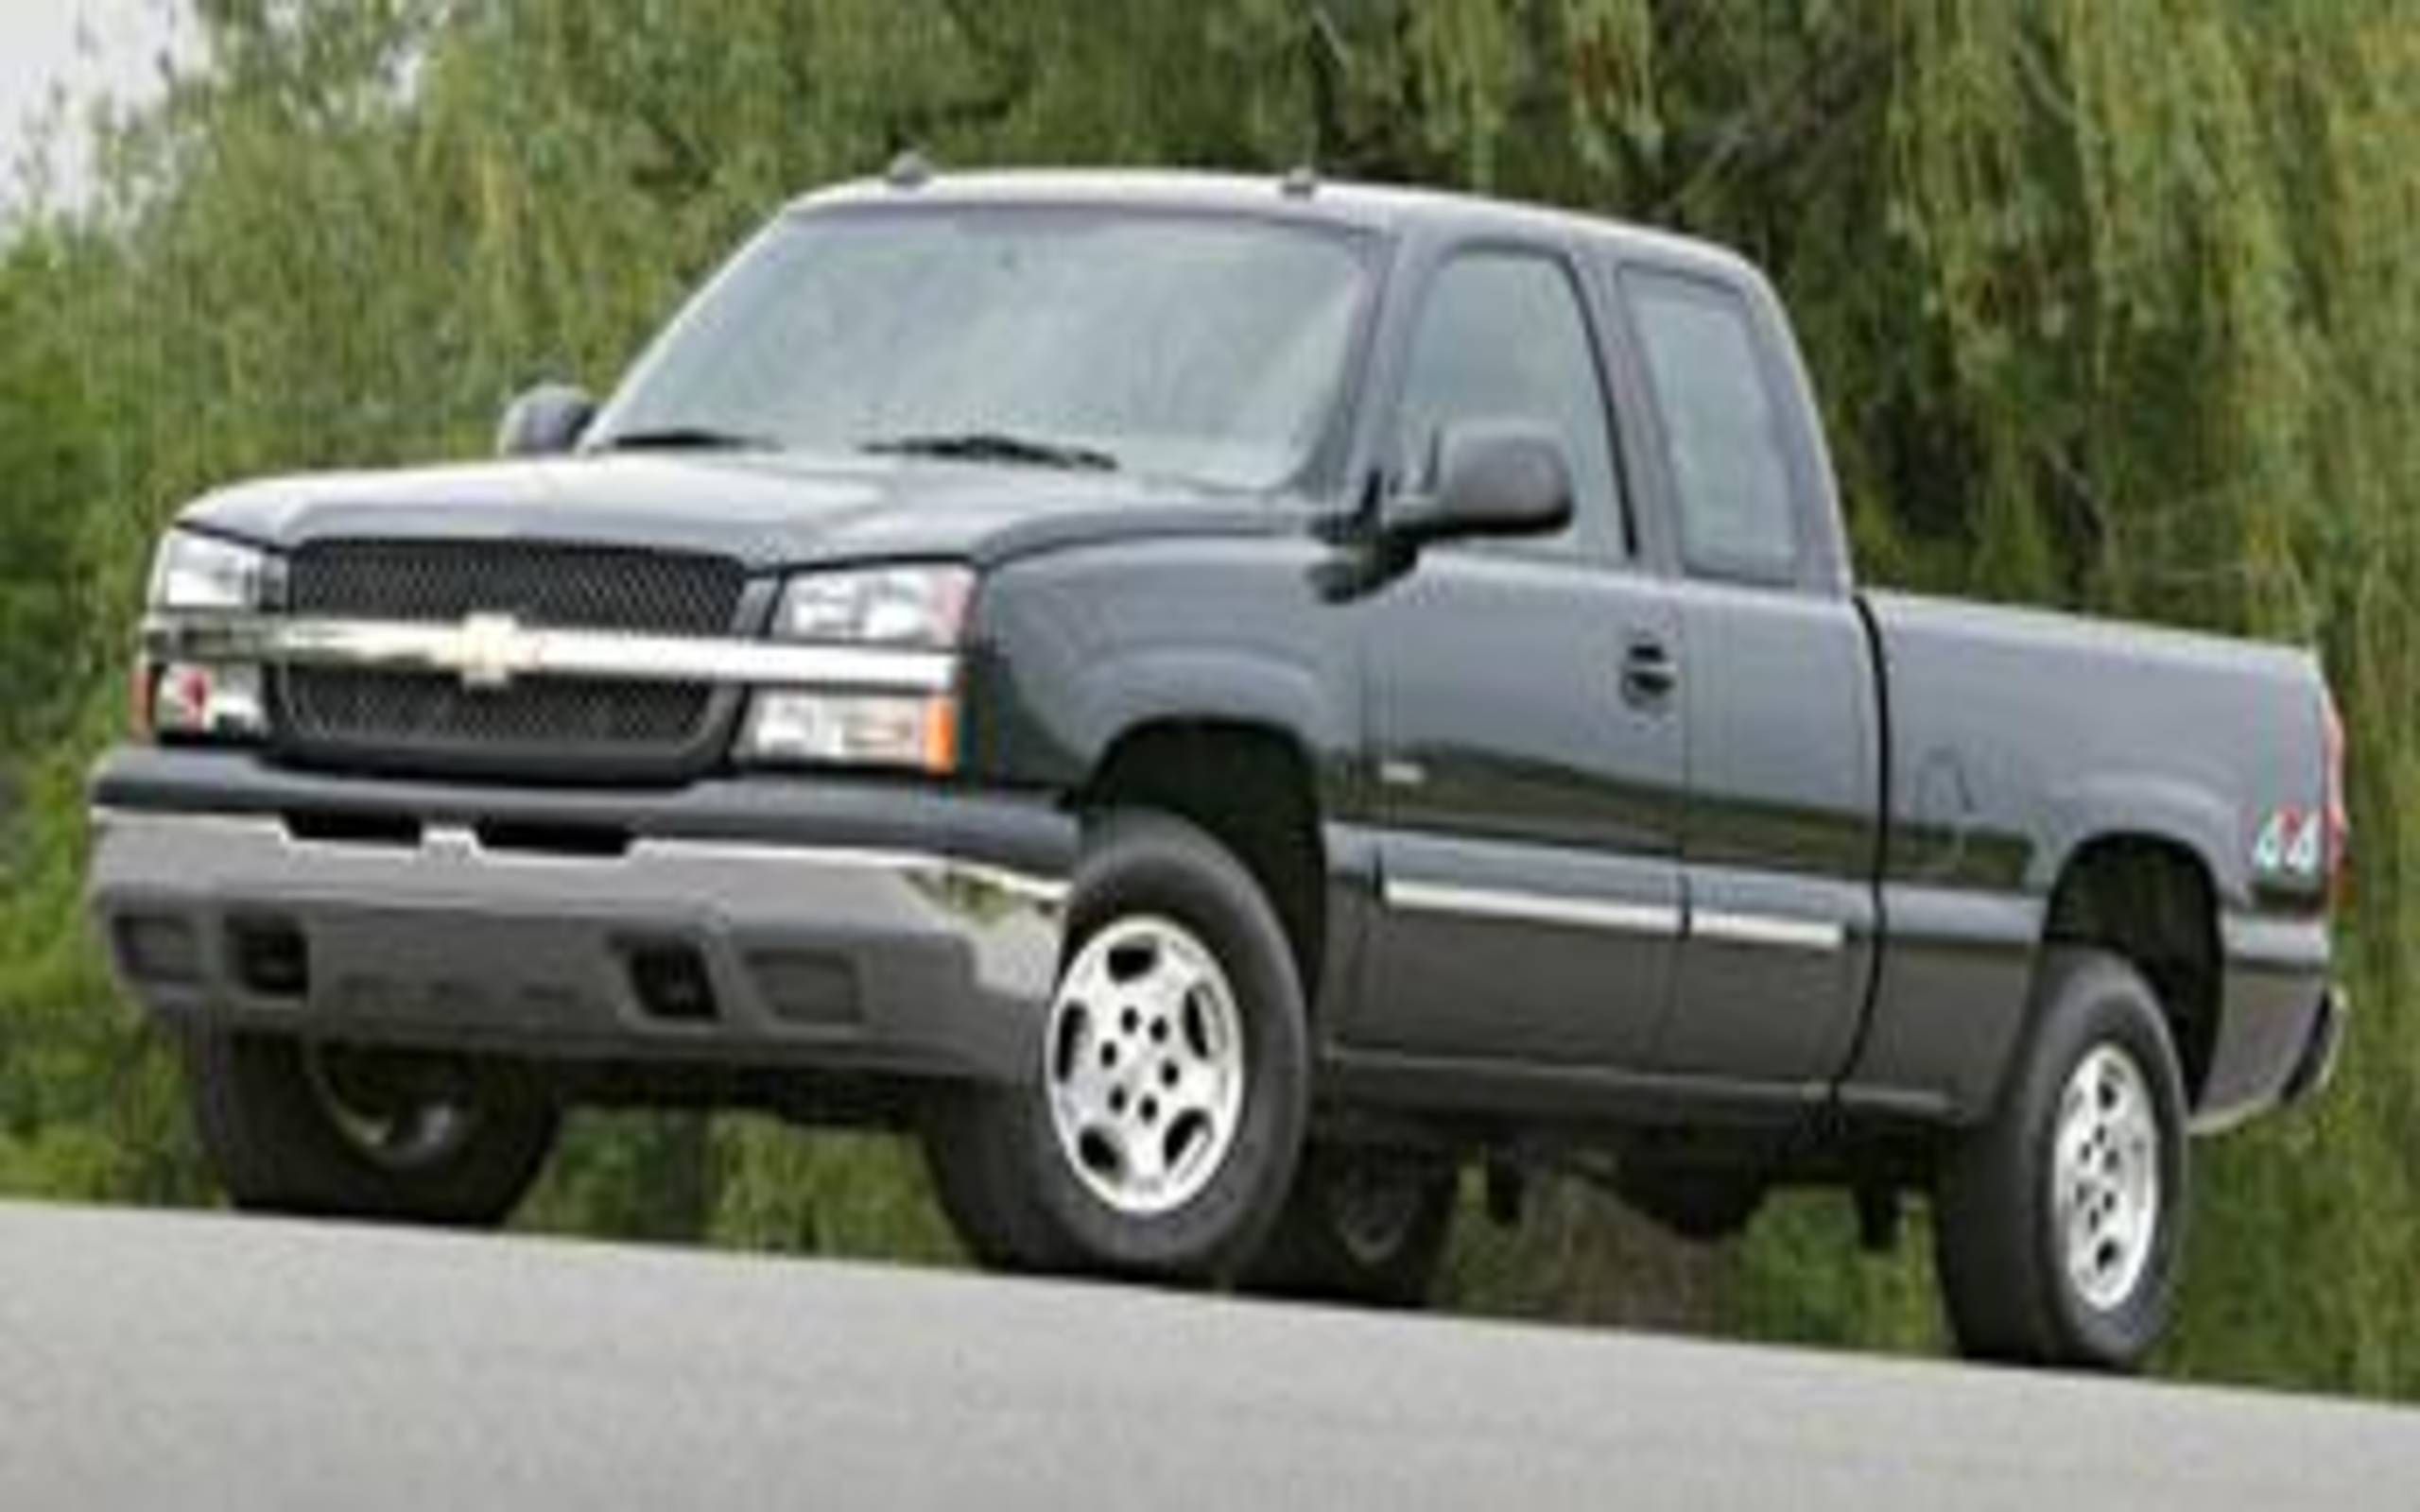 2005 Chevrolet Silverado LS 1500 Hybrid: Not A Bad Idea, At All: An  Earth-Friendly Option For Drywallers